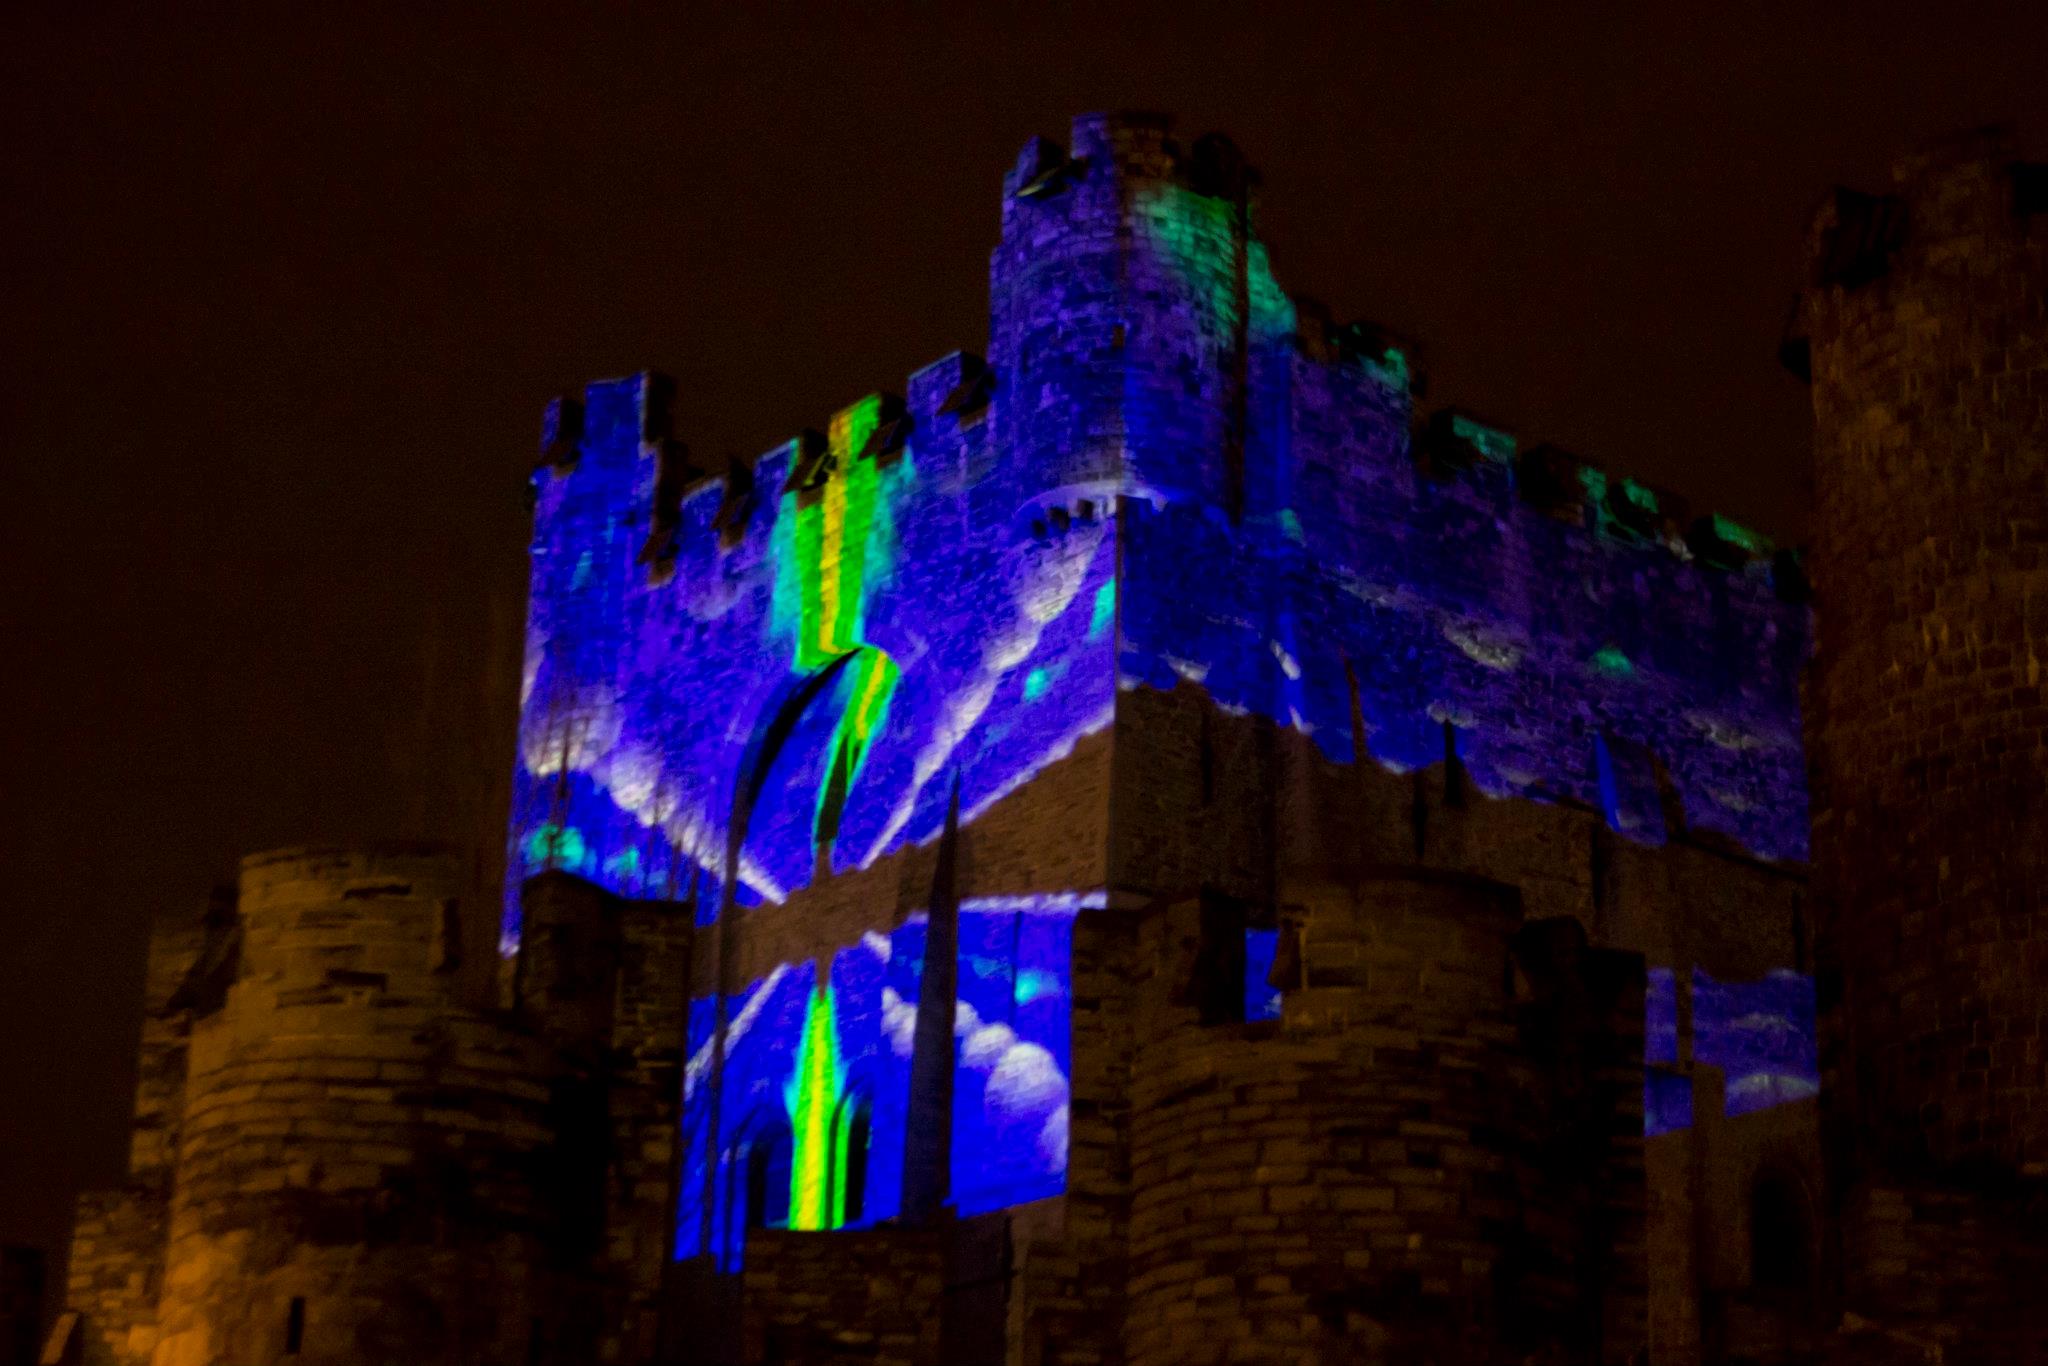 Simulated STM of nanowires projected on the Gravensteen (Ghent) during the 2012 Light Festival). Courtesy of Glenn Pollefeyt